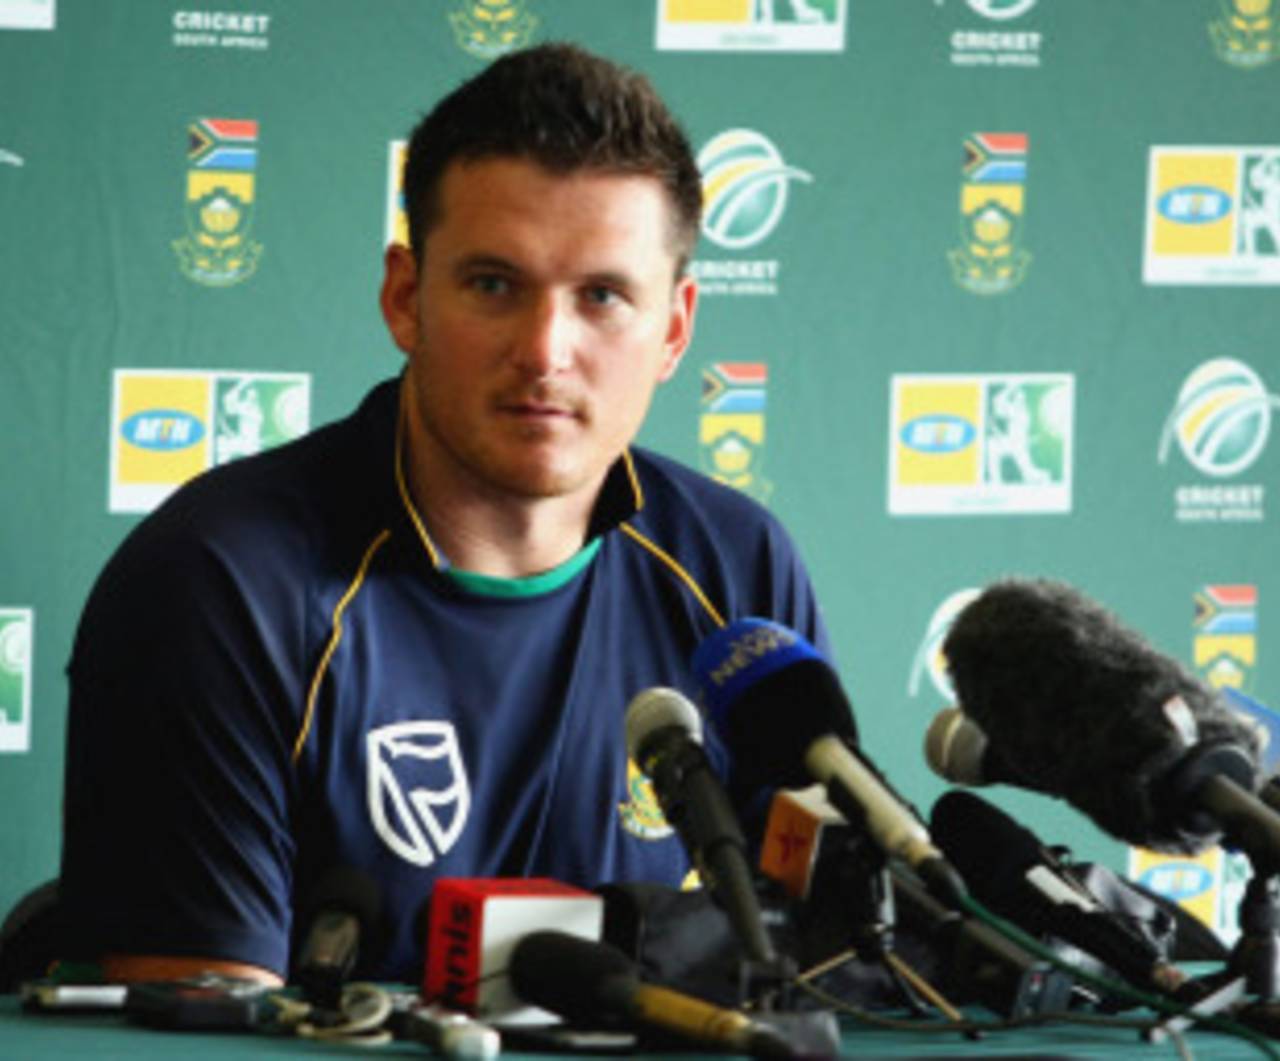 Graeme Smith speaks at a press conference ahead of the ODI series against India, Durban, January 11, 2011